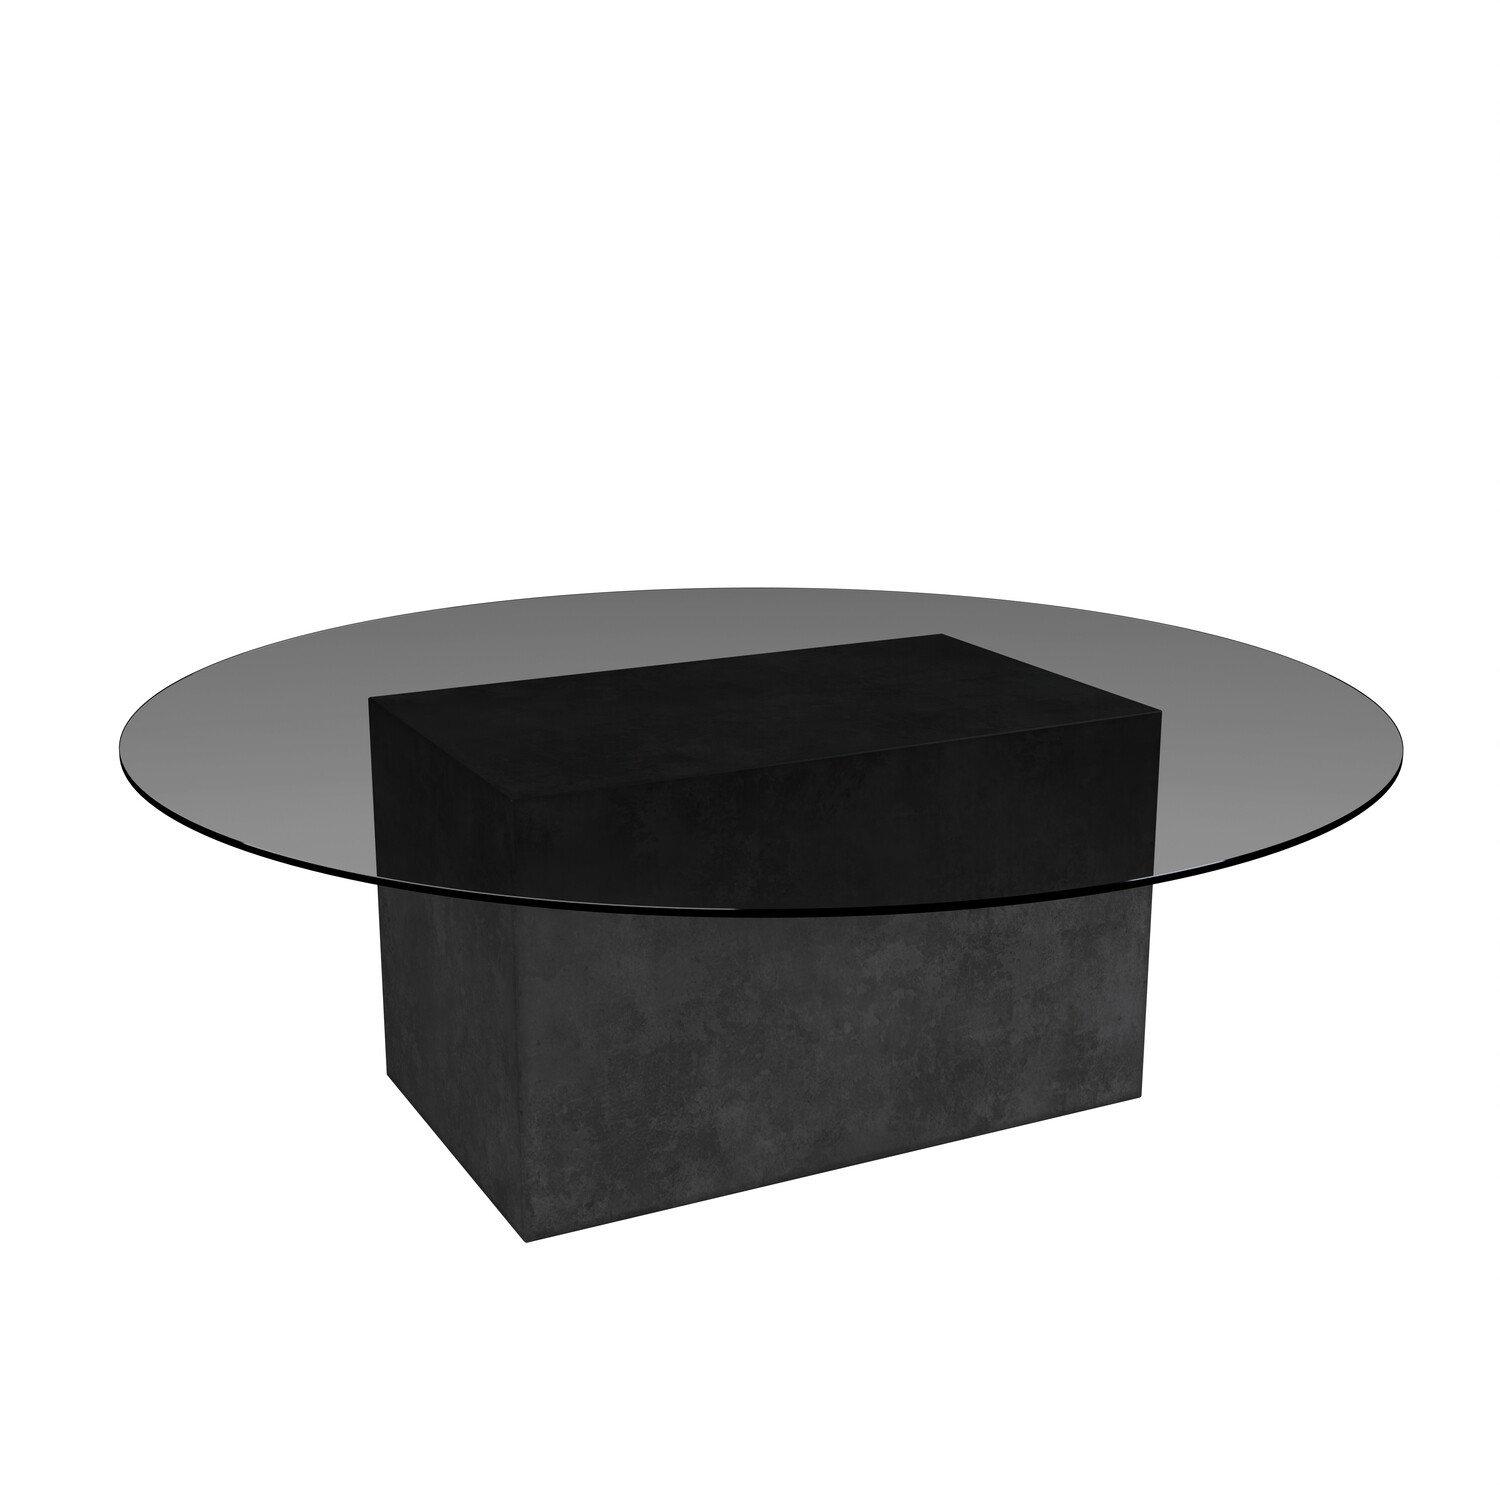 Sirena Concrete coffee table with round smoked glass top - Charcoal